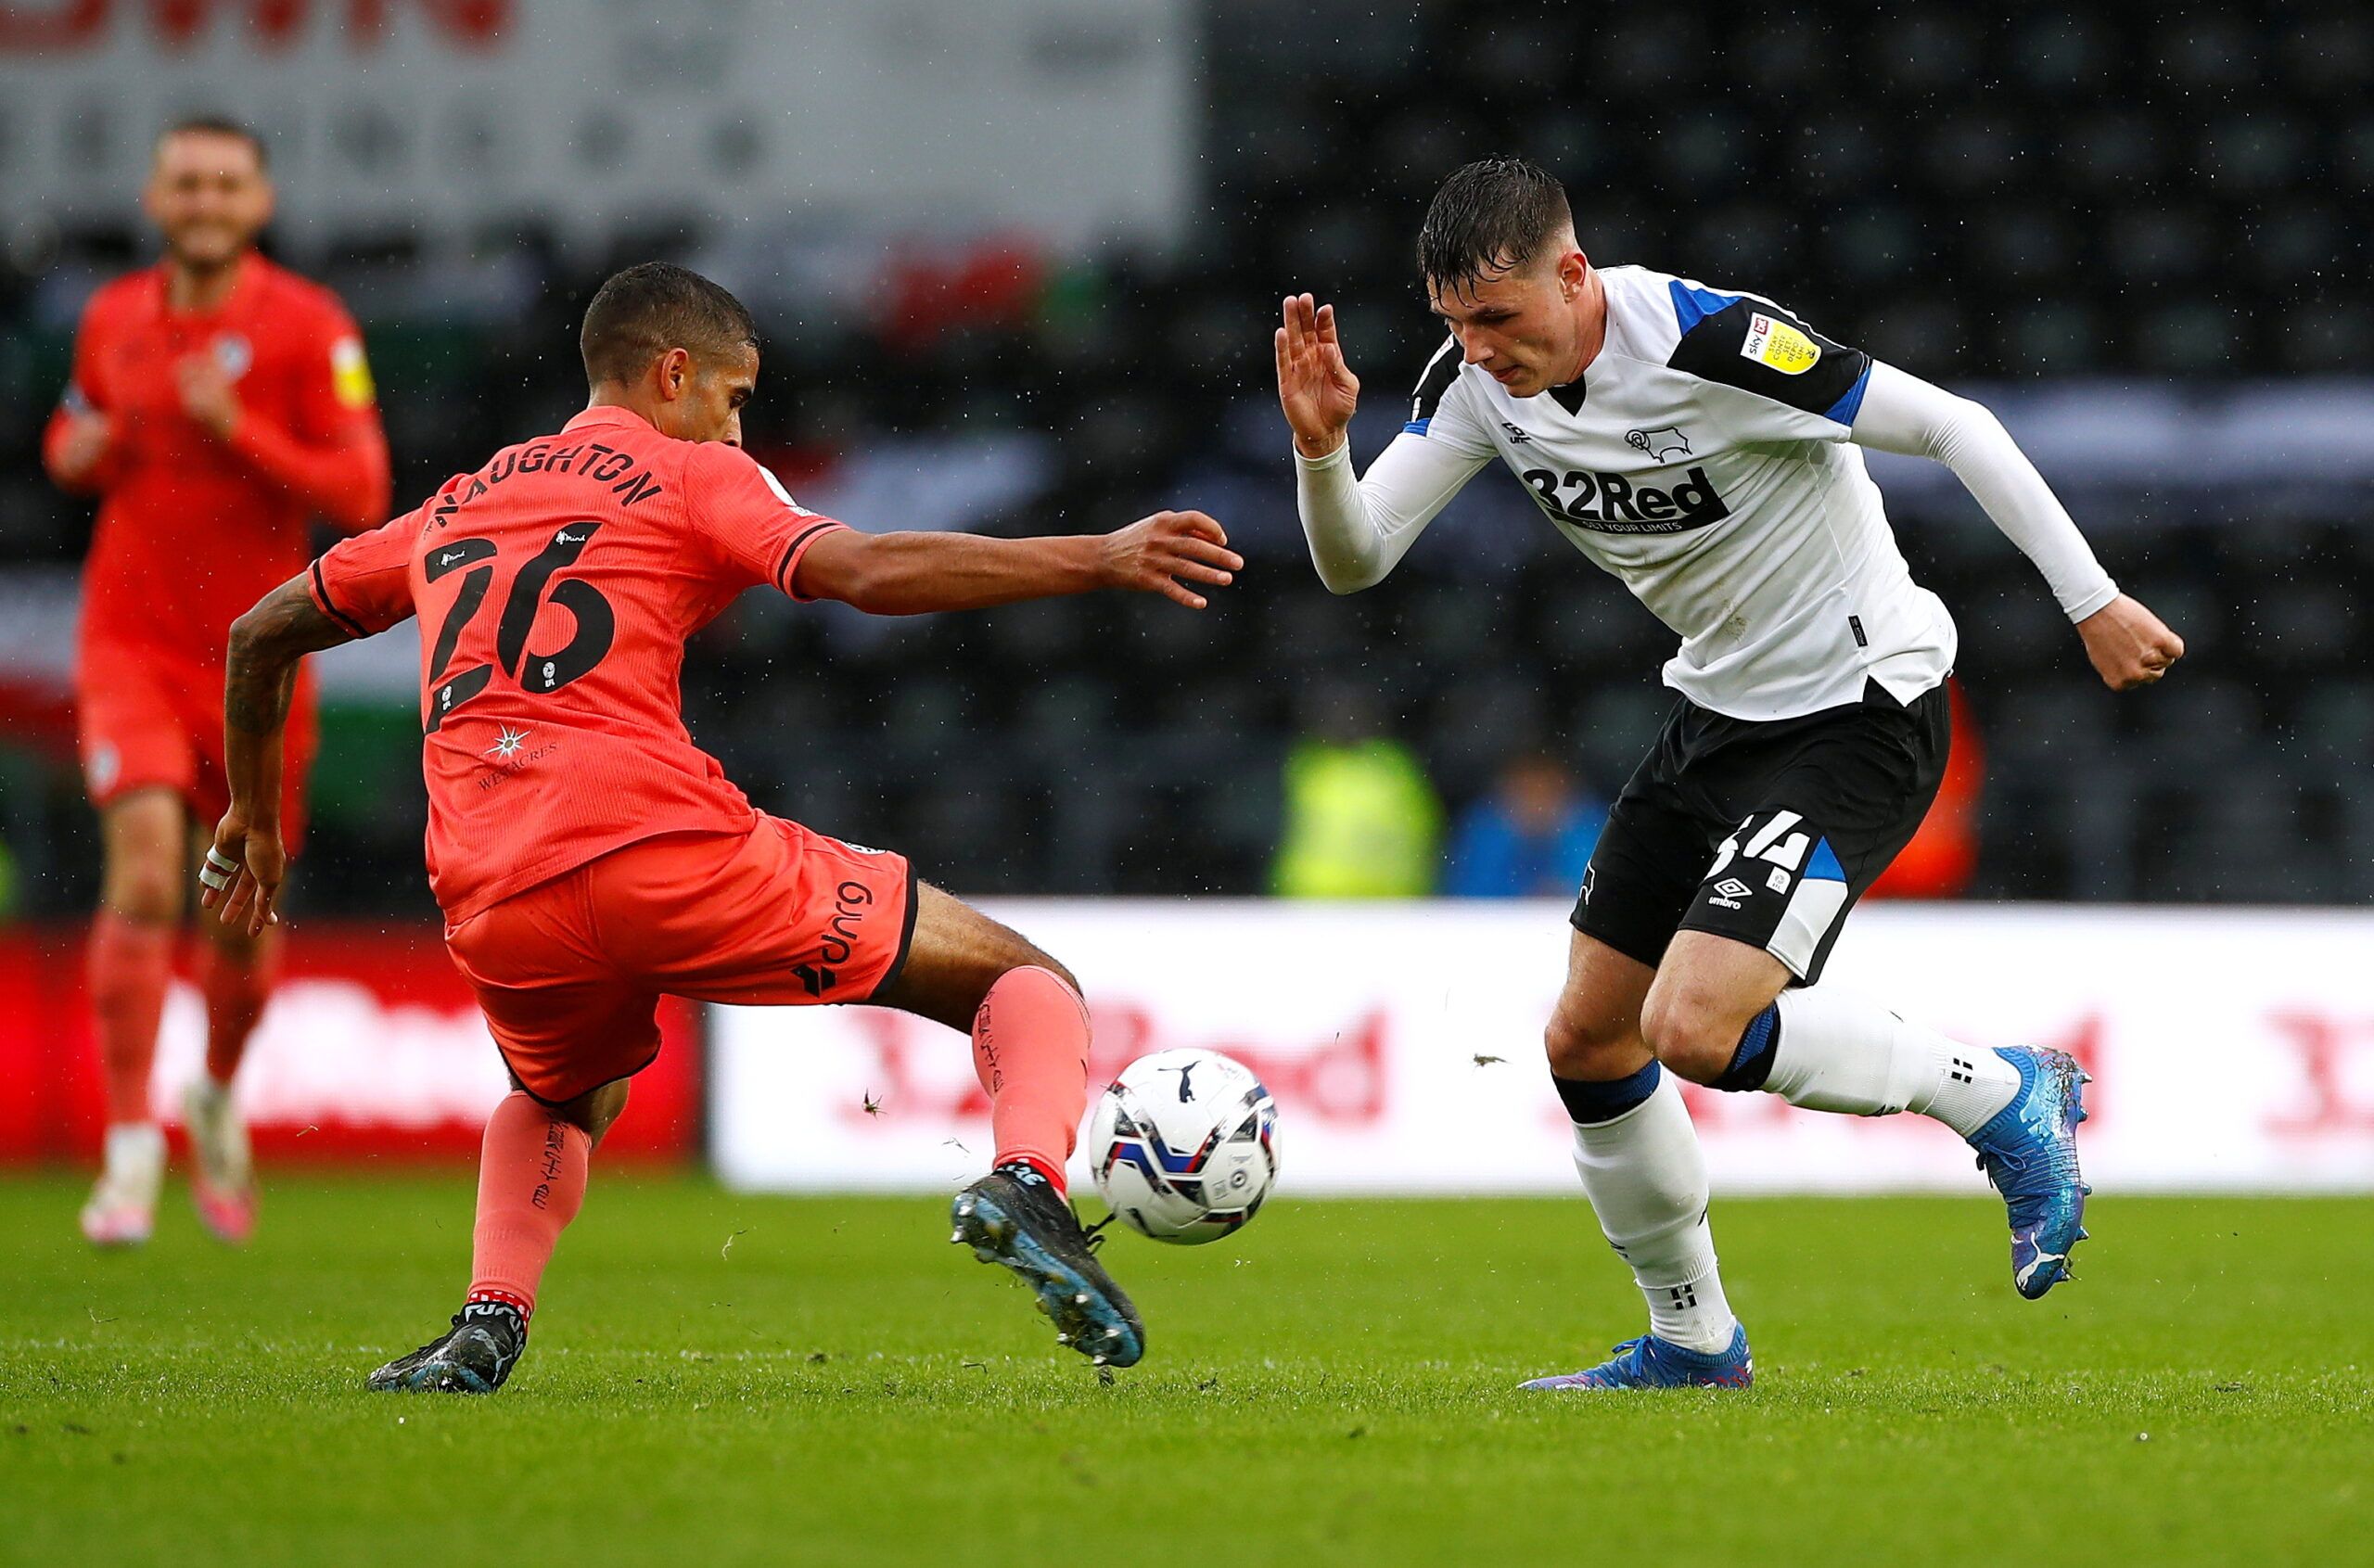 Soccer Football - Championship - Derby County v Swansea City - Pride Park, Derby, Britain - October 2, 2021  Swansea City's Kyle Naughton in action with Derby County's Jack Stretton  Action Images/Jason Cairnduff  EDITORIAL USE ONLY. No use with unauthorized audio, video, data, fixture lists, club/league logos or 